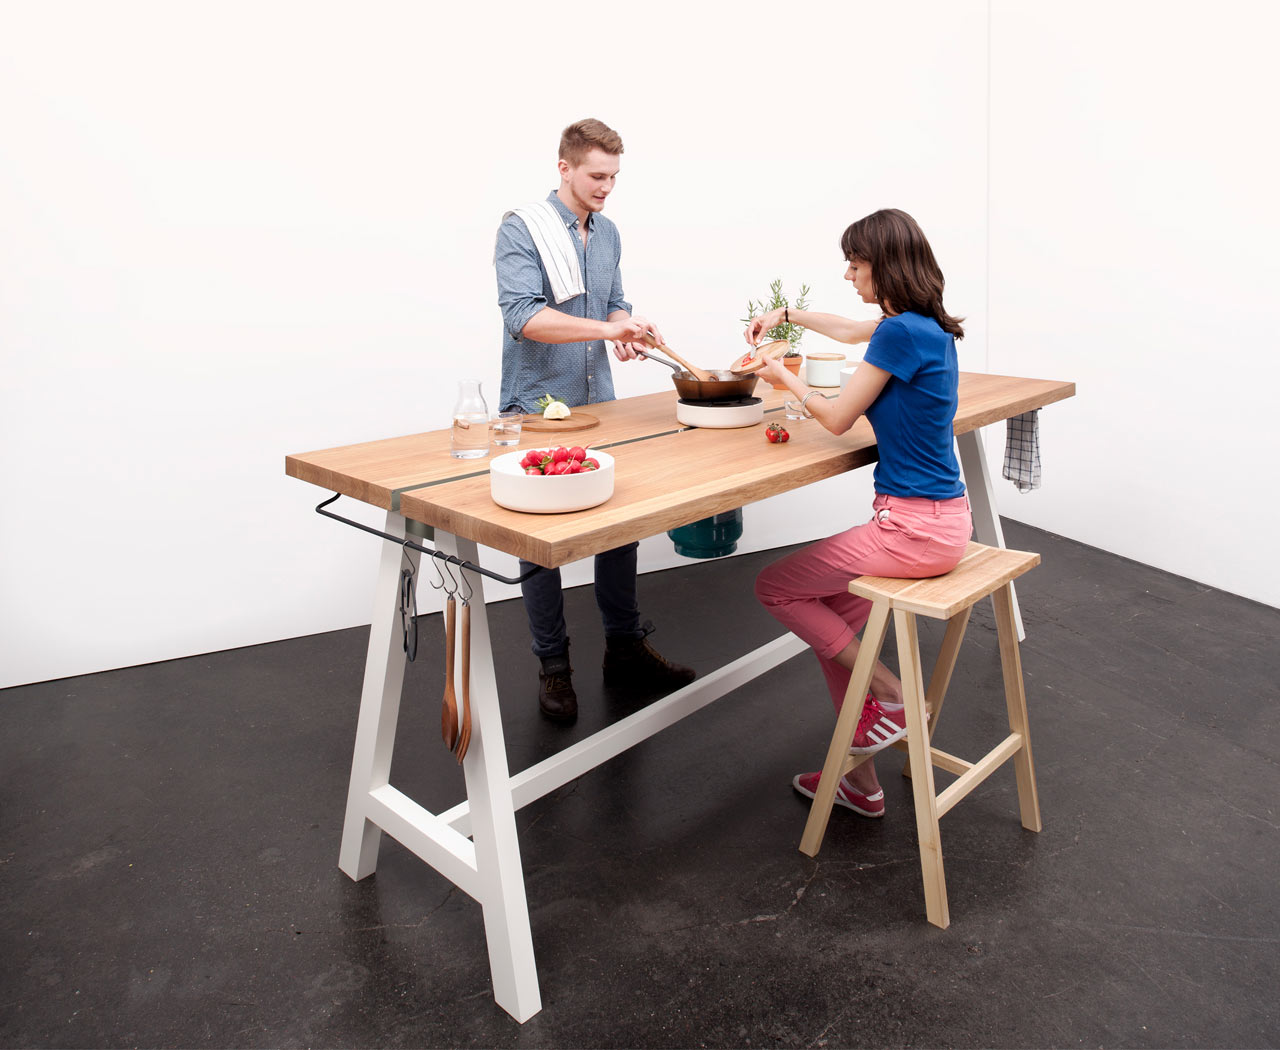 A Multipurpose Table You Can Prep, Cook, and Eat At